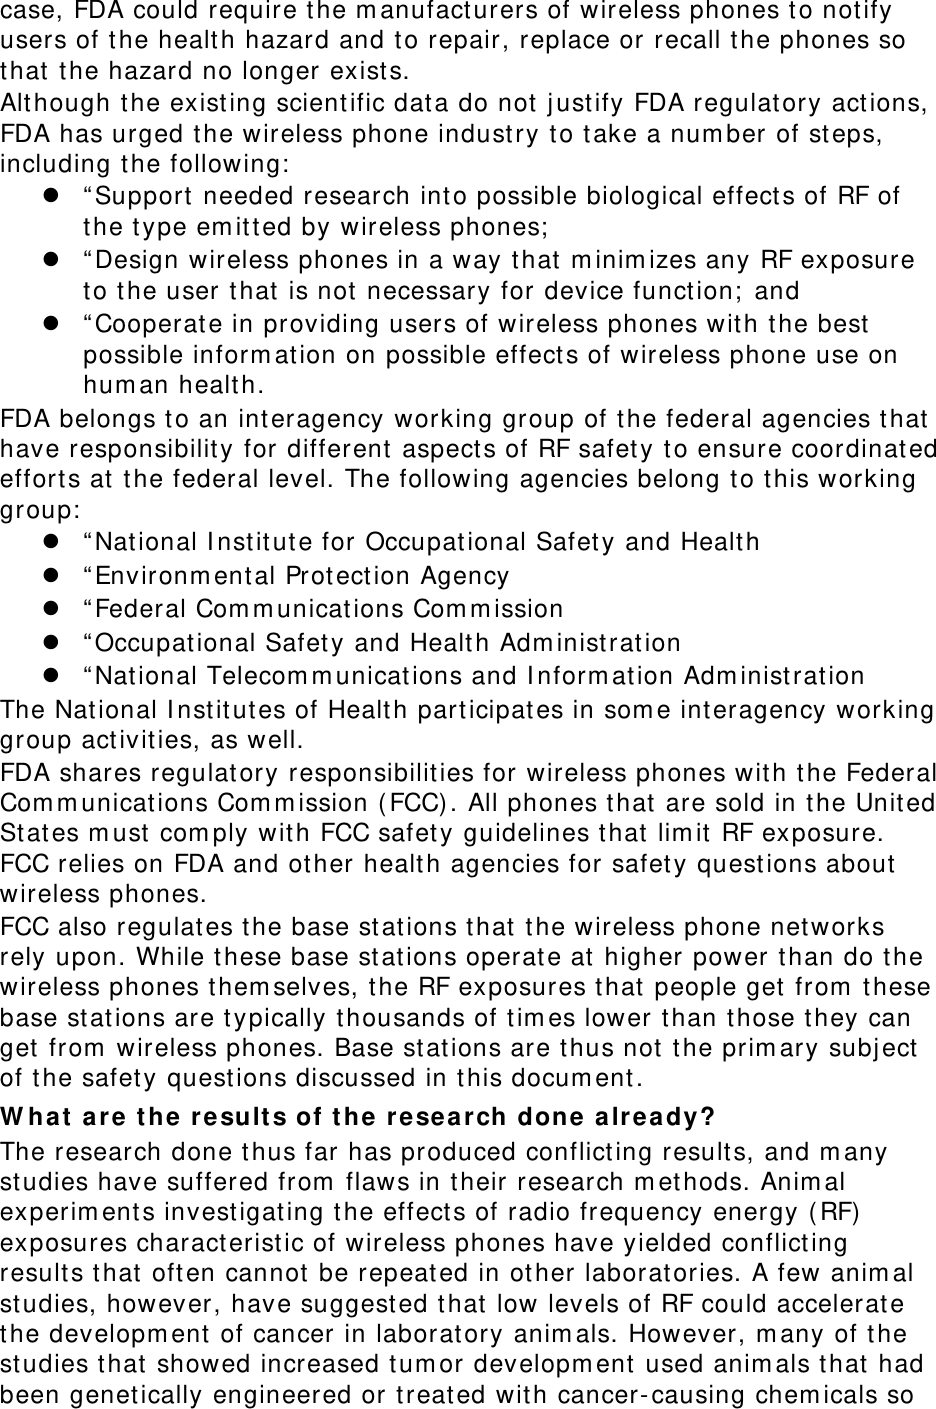 case, FDA could require the m anufact urers of wireless phones t o not ify users of t he health hazard and to repair, replace or recall t he phones so that  t he hazard no longer exist s. Alt hough t he existing scient ific data do not j ust ify FDA regulat ory act ions, FDA has urged t he wireless phone industry to t ake a num ber of steps, including t he following:  z “ Support needed research int o possible biological effect s of RF of the type em itted by wireless phones;  z “ Design wireless phones in a way t hat m inim izes any RF exposure to t he user t hat is not  necessary for device funct ion;  and z “ Cooperate in providing users of wireless phones with t he best  possible inform ation on possible effect s of wireless phone use on hum an health. FDA belongs to an int eragency working group of t he federal agencies t hat have responsibilit y for different  aspect s of RF safety t o ensure coordinat ed effort s at the federal level. The following agencies belong t o t his working group:  z “ National I nstitut e for Occupational Safet y and Healt h z “ Environm ent al Protect ion Agency z “ Federal Com m unications Com m ission z “ Occupational Safet y and Healt h Adm inist ration z “ National Telecom m unicat ions and I nform at ion Adm inistration The National I nstitut es of Healt h part icipates in som e interagency working group act ivities, as well. FDA shares regulat ory responsibilities for wireless phones with t he Federal Com m unications Com m ission (FCC). All phones t hat are sold in t he United St at es m ust com ply with FCC safet y guidelines that  lim it  RF exposure. FCC relies on FDA and other health agencies for safet y quest ions about  wireless phones. FCC also regulat es t he base stat ions t hat t he wireless phone networks rely upon. While t hese base stations operat e at  higher power t han do the wireless phones them selves, the RF exposures that  people get  from  t hese base stations are t ypically t housands of t im es lower t han t hose t hey can get  from  wireless phones. Base stations are t hus not t he prim ary subj ect of t he safety quest ions discussed in t his docum ent . W hat  a re  t he result s of t h e  r e sea r ch done a lr e a dy? The research done t hus far has produced conflict ing result s, and m any studies have suffered from  flaws in their research m ethods. Anim al experim ent s invest igating t he effect s of radio frequency energy ( RF)  exposures charact erist ic of wireless phones have yielded conflict ing results t hat oft en cannot be repeated in ot her laborat ories. A few anim al studies, however, have suggest ed that  low levels of RF could accelerat e the developm ent of cancer in laboratory anim als. However, m any of t he studies that  showed increased tum or developm ent used anim als t hat had been genet ically engineered or t reated with cancer- causing chem icals so 